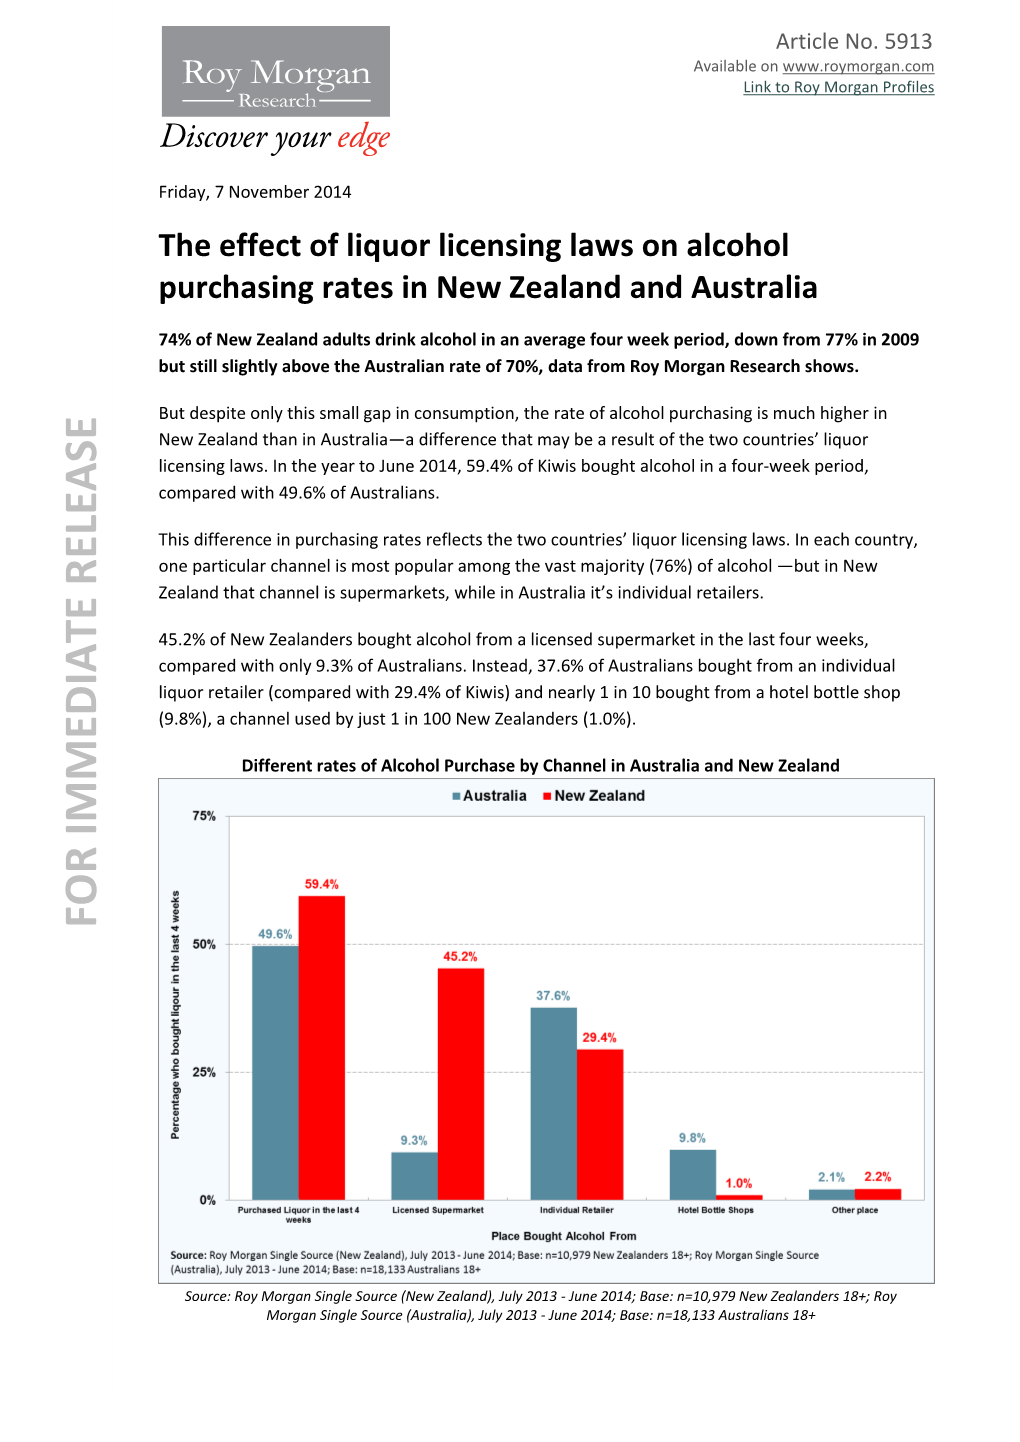 The Effect of Liquor Licensing Laws on Alcohol Purchasing Rates in New Zealand and Australia